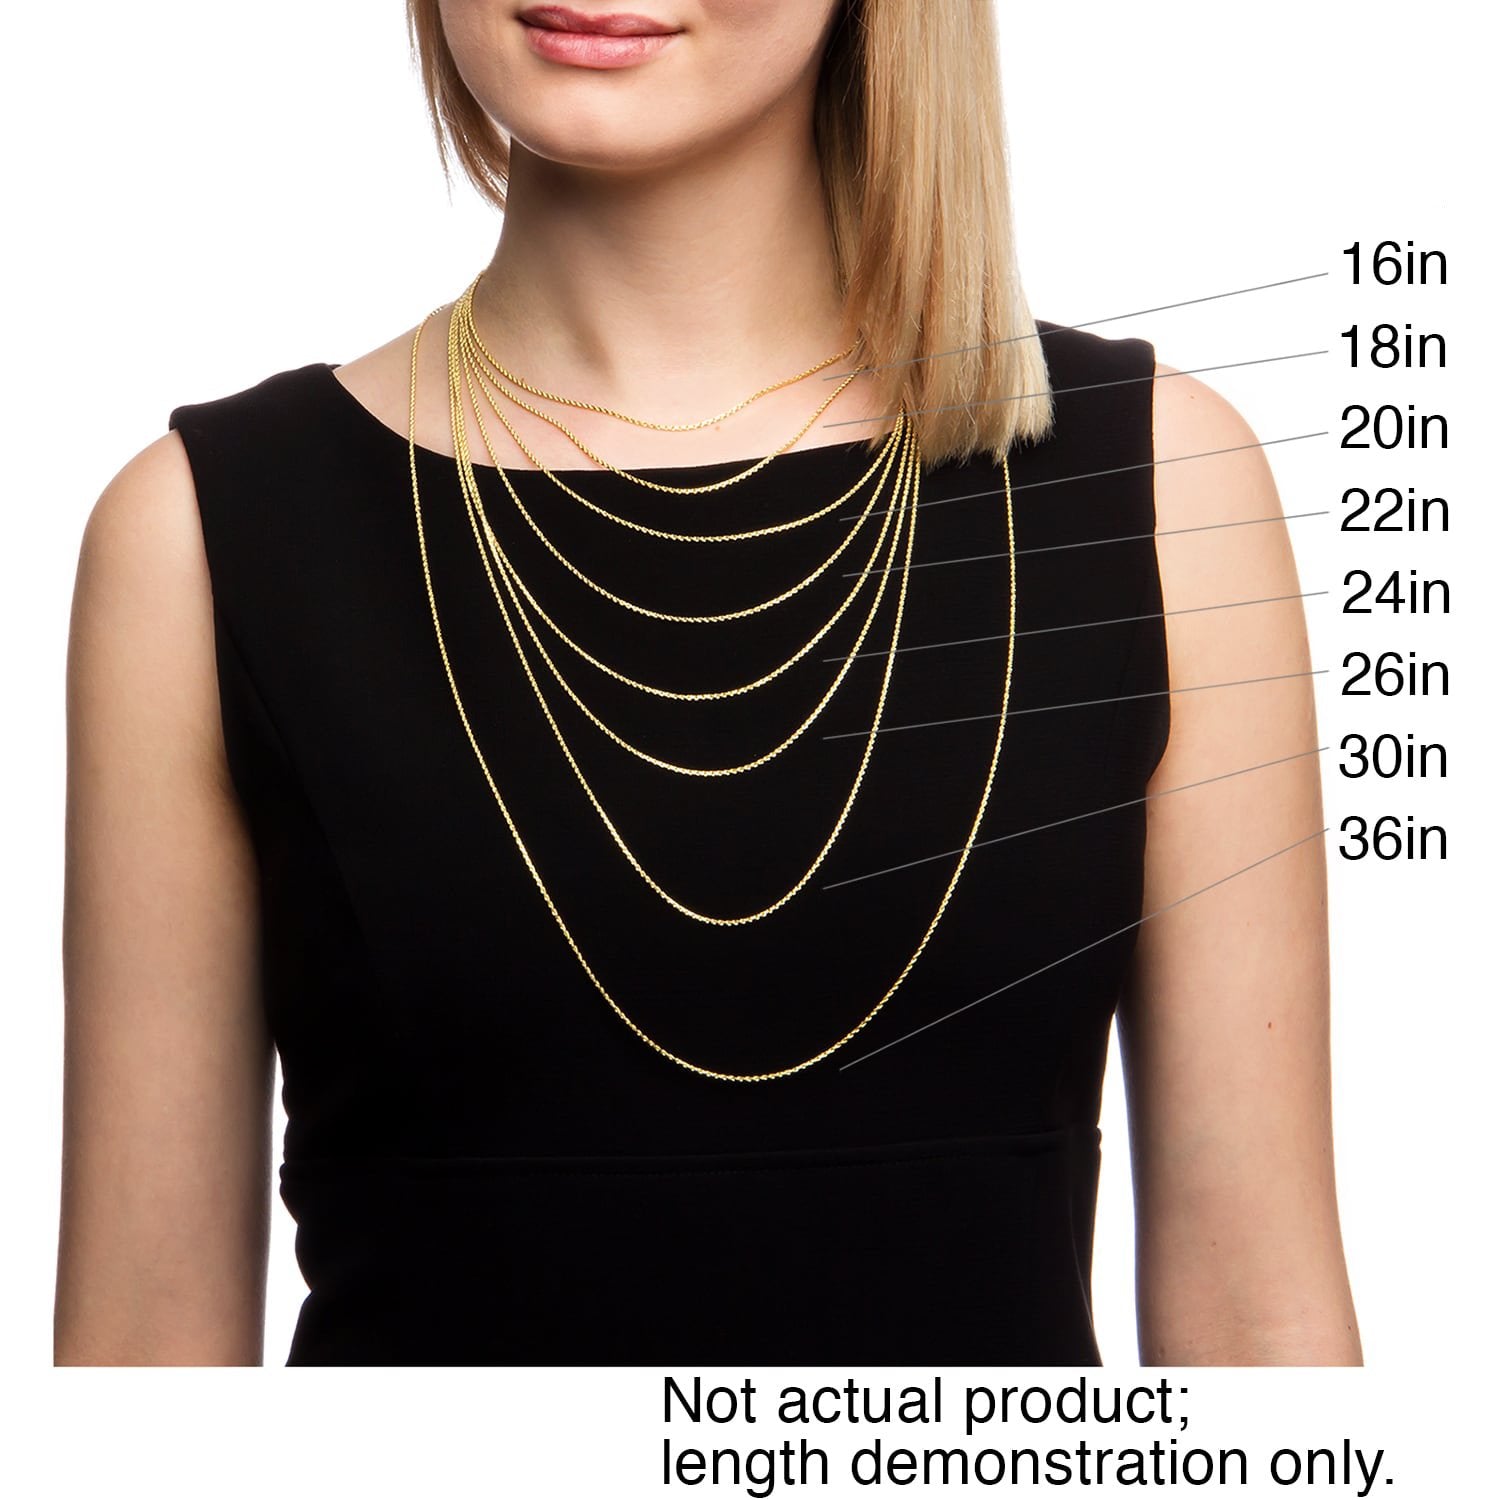 14K Yellow Gold 4.5mm Paperclip Necklace